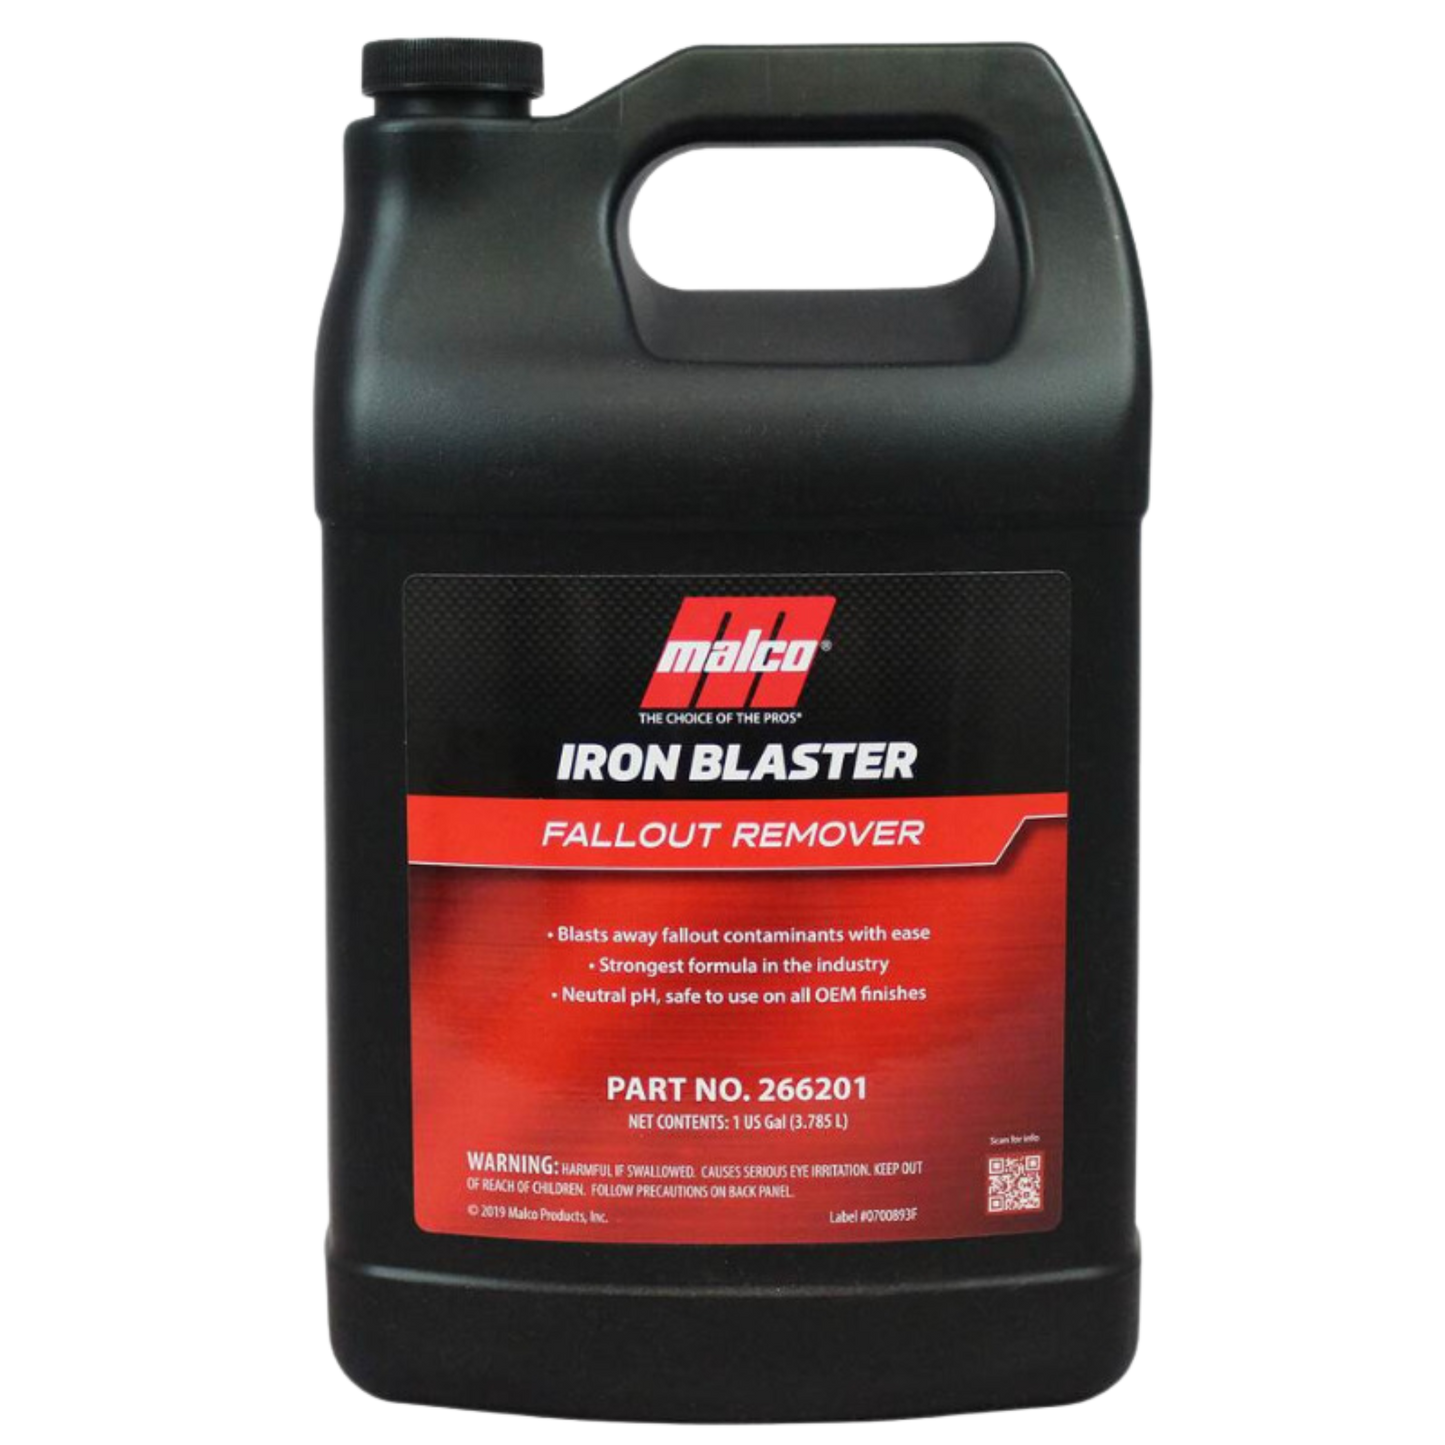 Iron Blaster Fallout Remover 1 gal